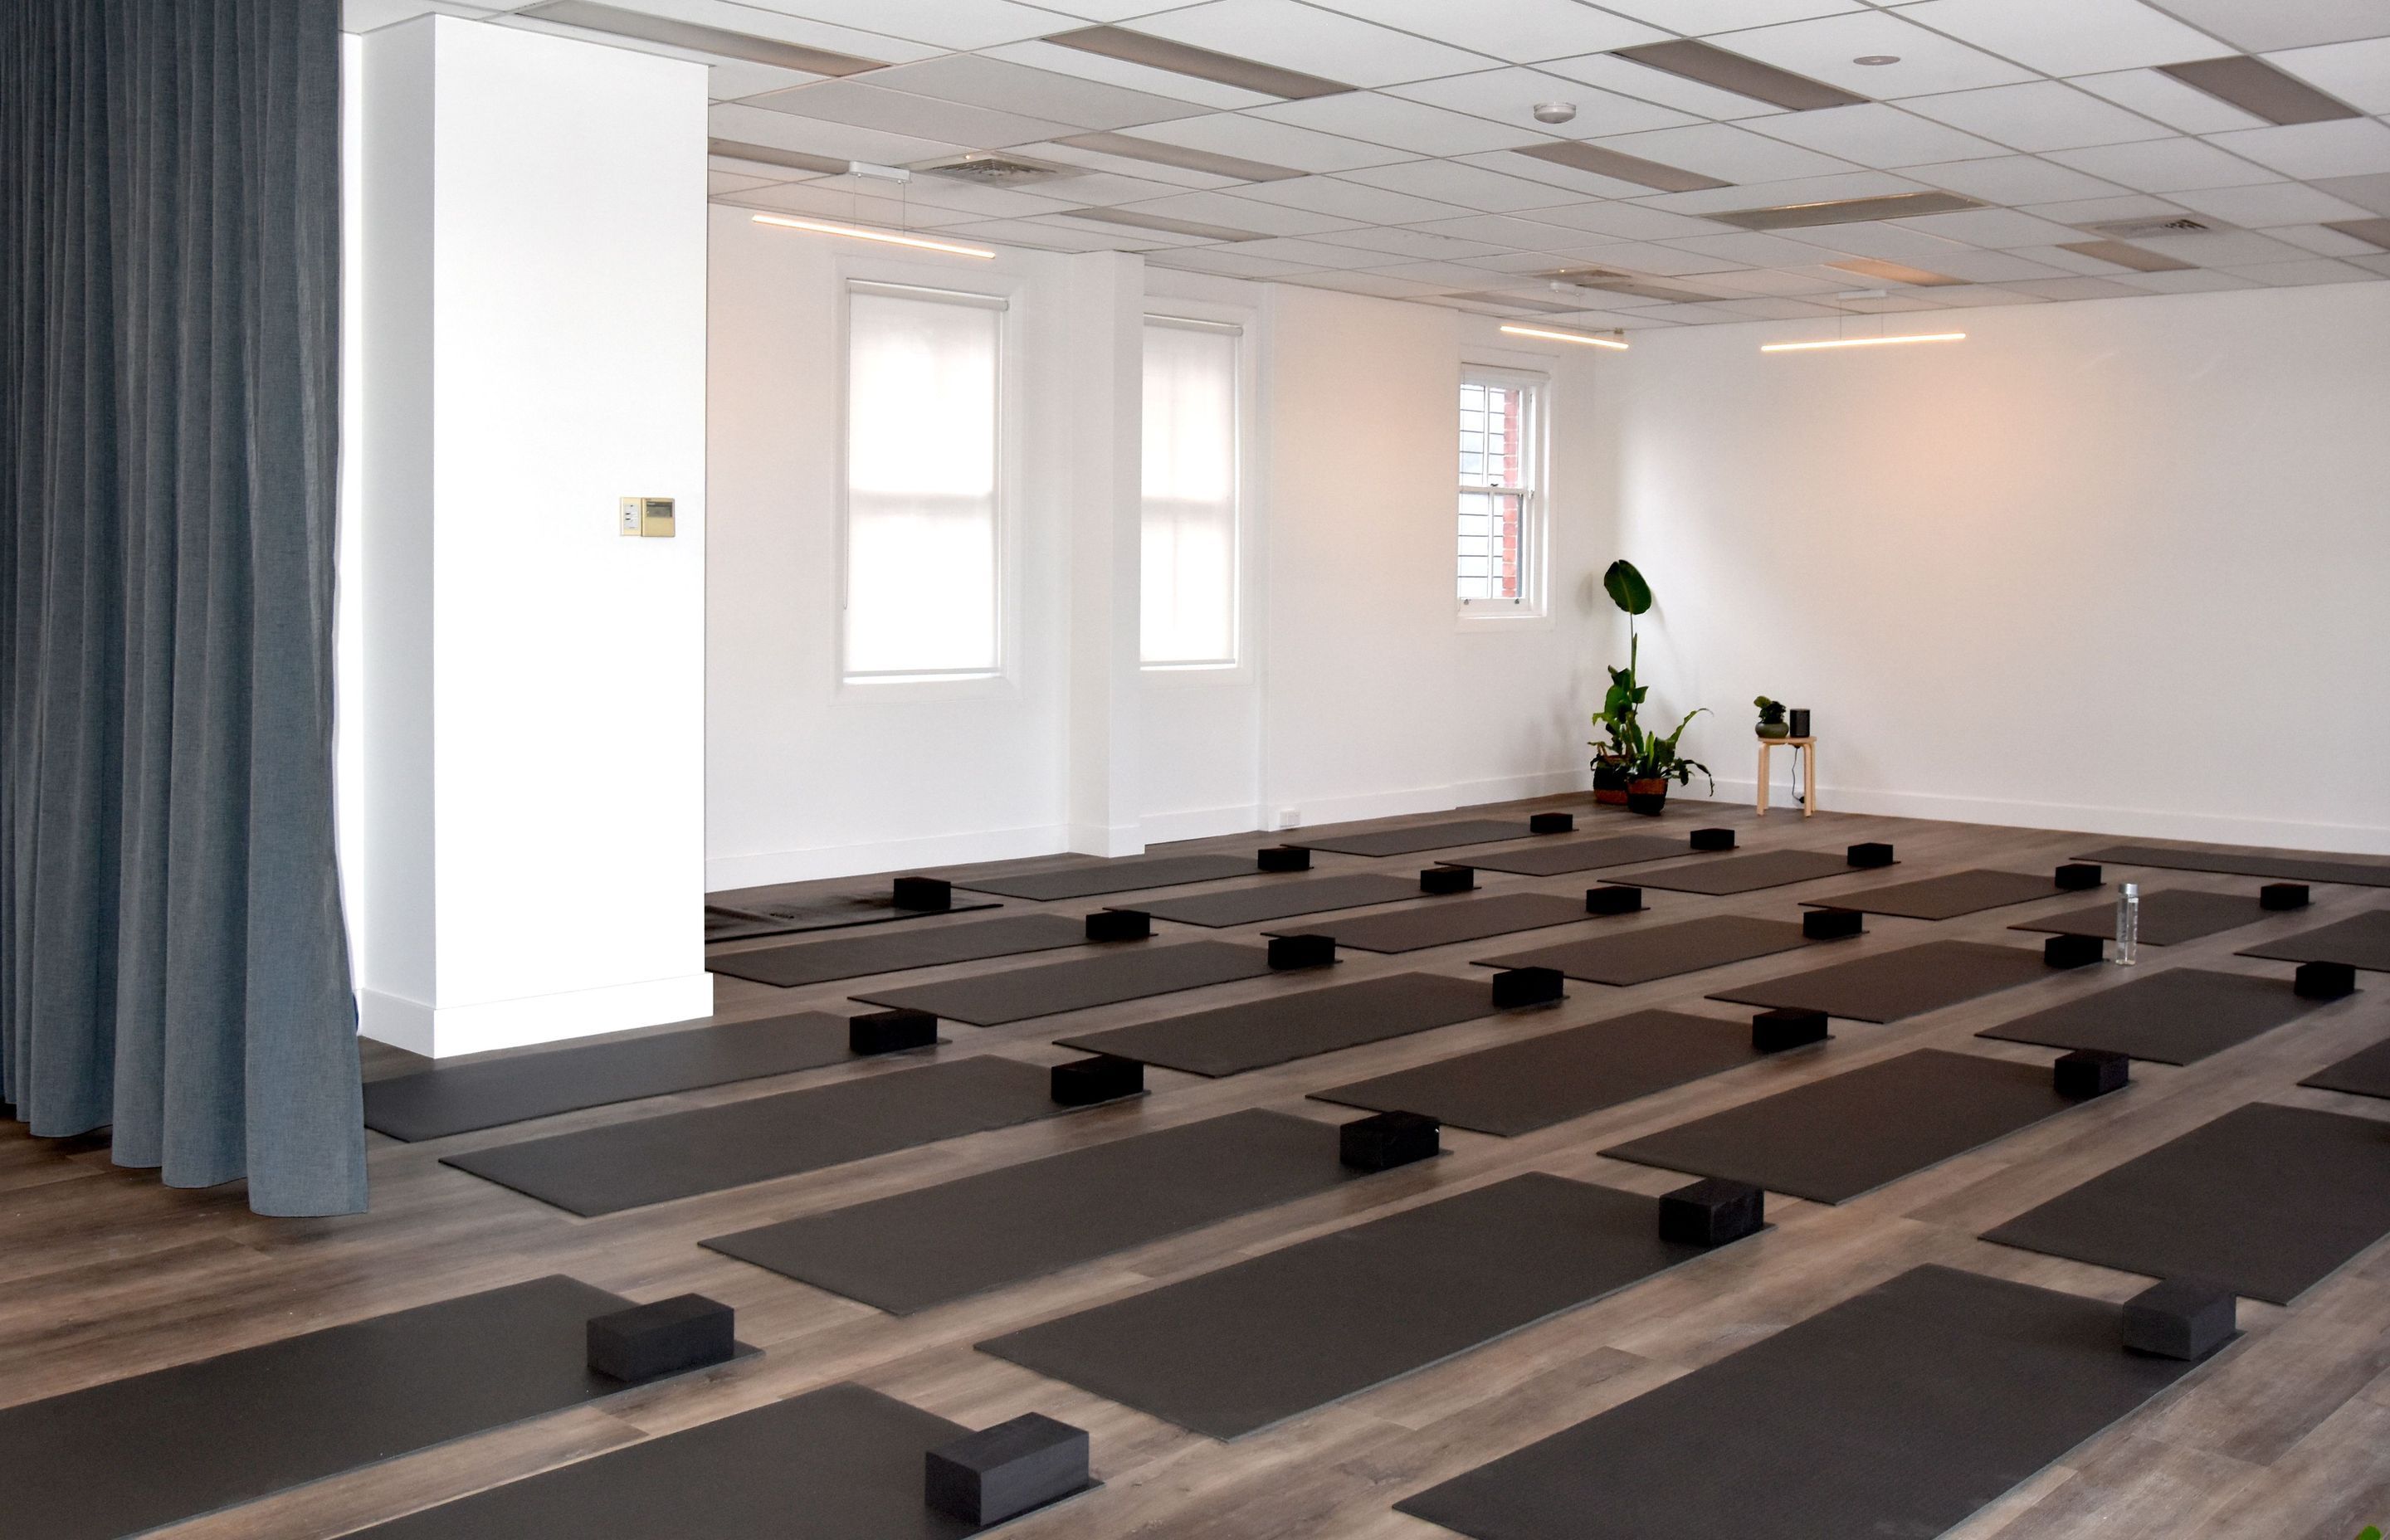 The Yoga Space Melbourne